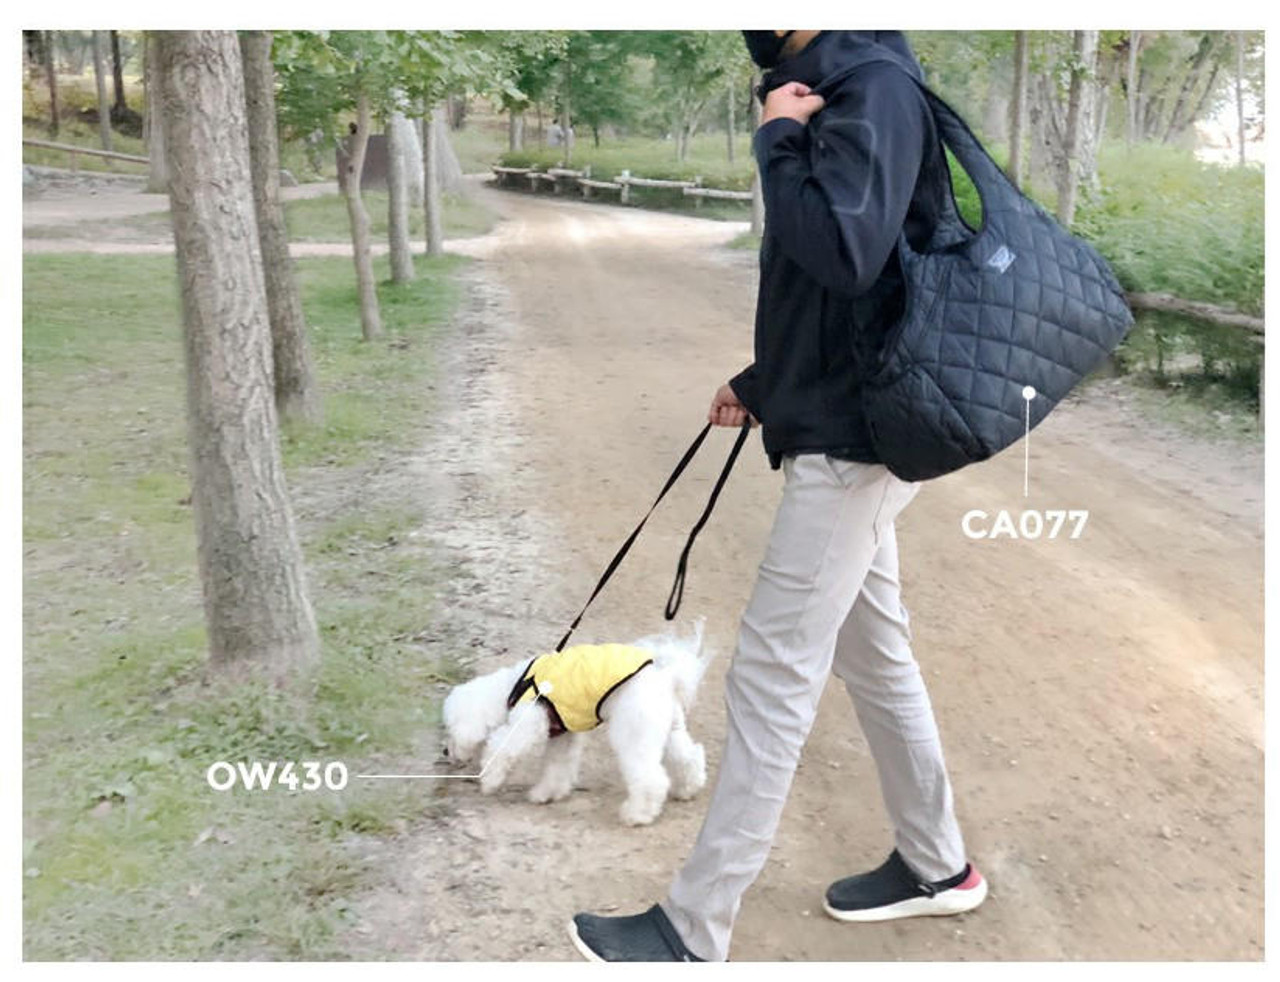 Outward Hound Excursion Dog Backpack - SMALL up to 18lbs